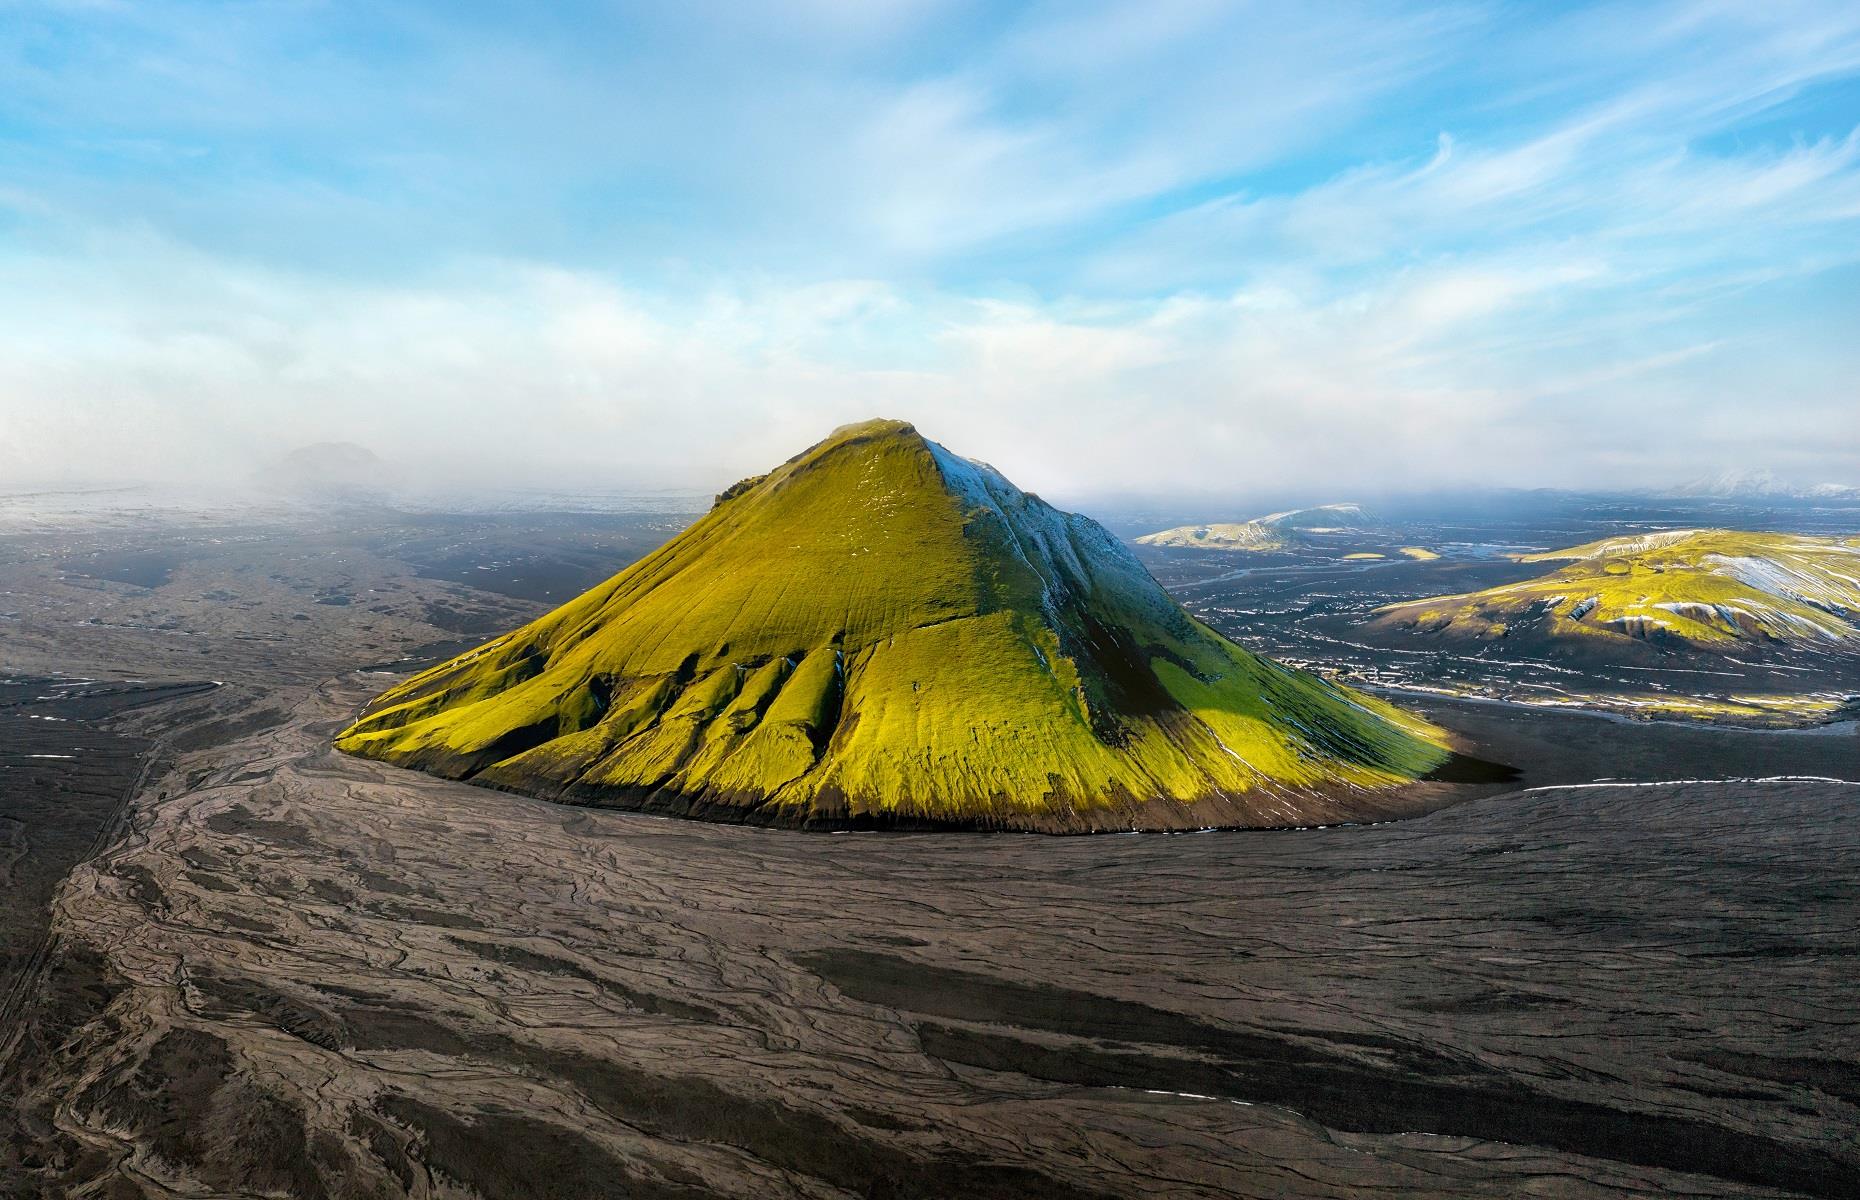 <p>Erupting from a desert of black sand, <a href="https://guidetoiceland.is/travel-iceland/drive/maelifell">Mælifell</a> is arguably Iceland's most astonishing volcano. Standing proud at almost 2,600 feet (791m), this majestic mountain was once concealed beneath Mýrdalsjökull glacier. When the ice retreated some 10,000 years ago, Mælifell became the focal feature of the landscape. Only accessible between June and September, the volcano is a popular spot for hikers, braving the unique and at times inhospitable terrain of southern Iceland.</p>